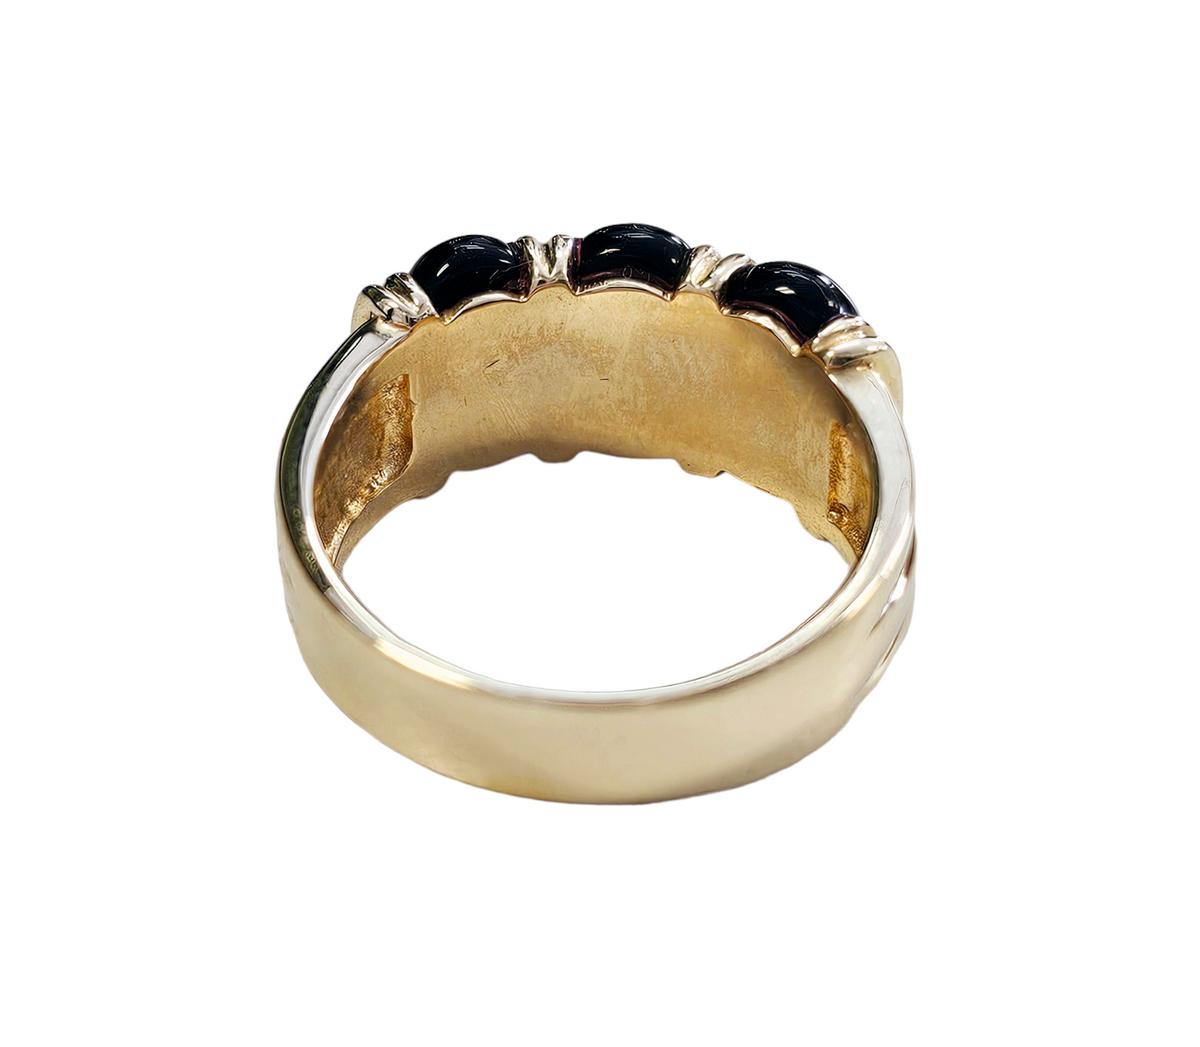 3-Stone Cabochon Black Onyx Channel Set Ring made in 14-Karat Yellow Gold